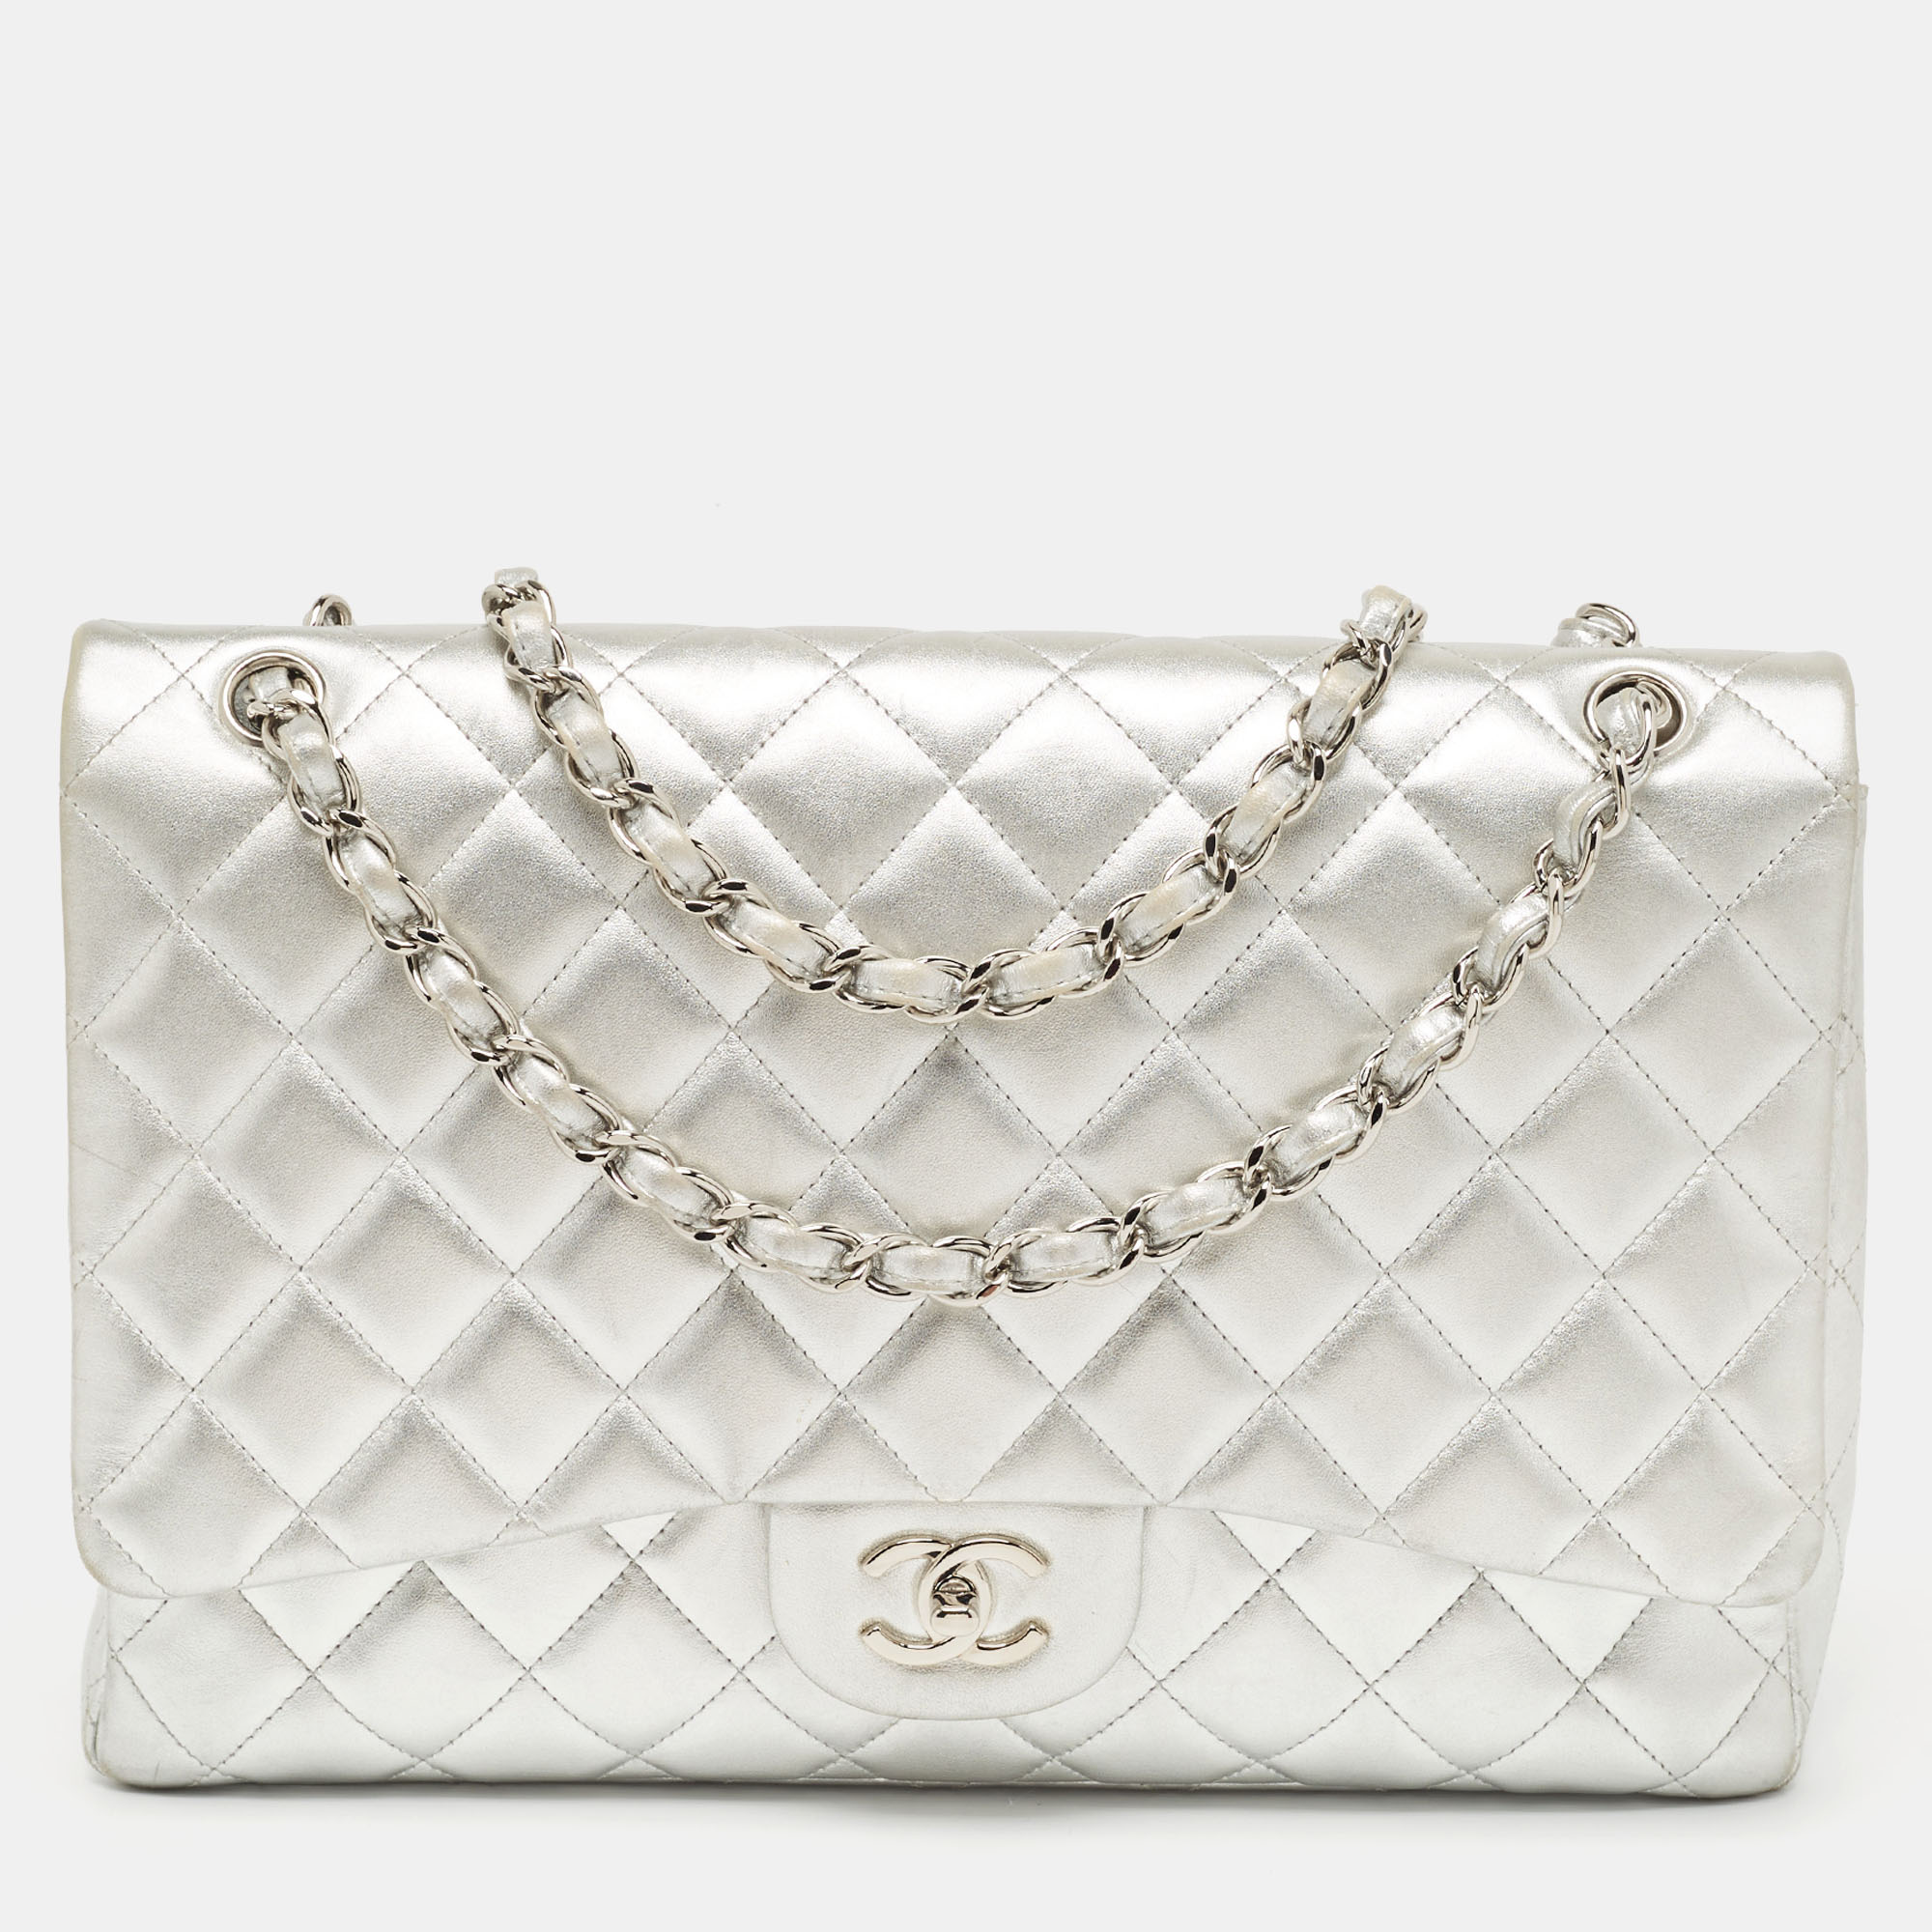 Chanel silver quilted lambskin leather maxi classic single flap bag